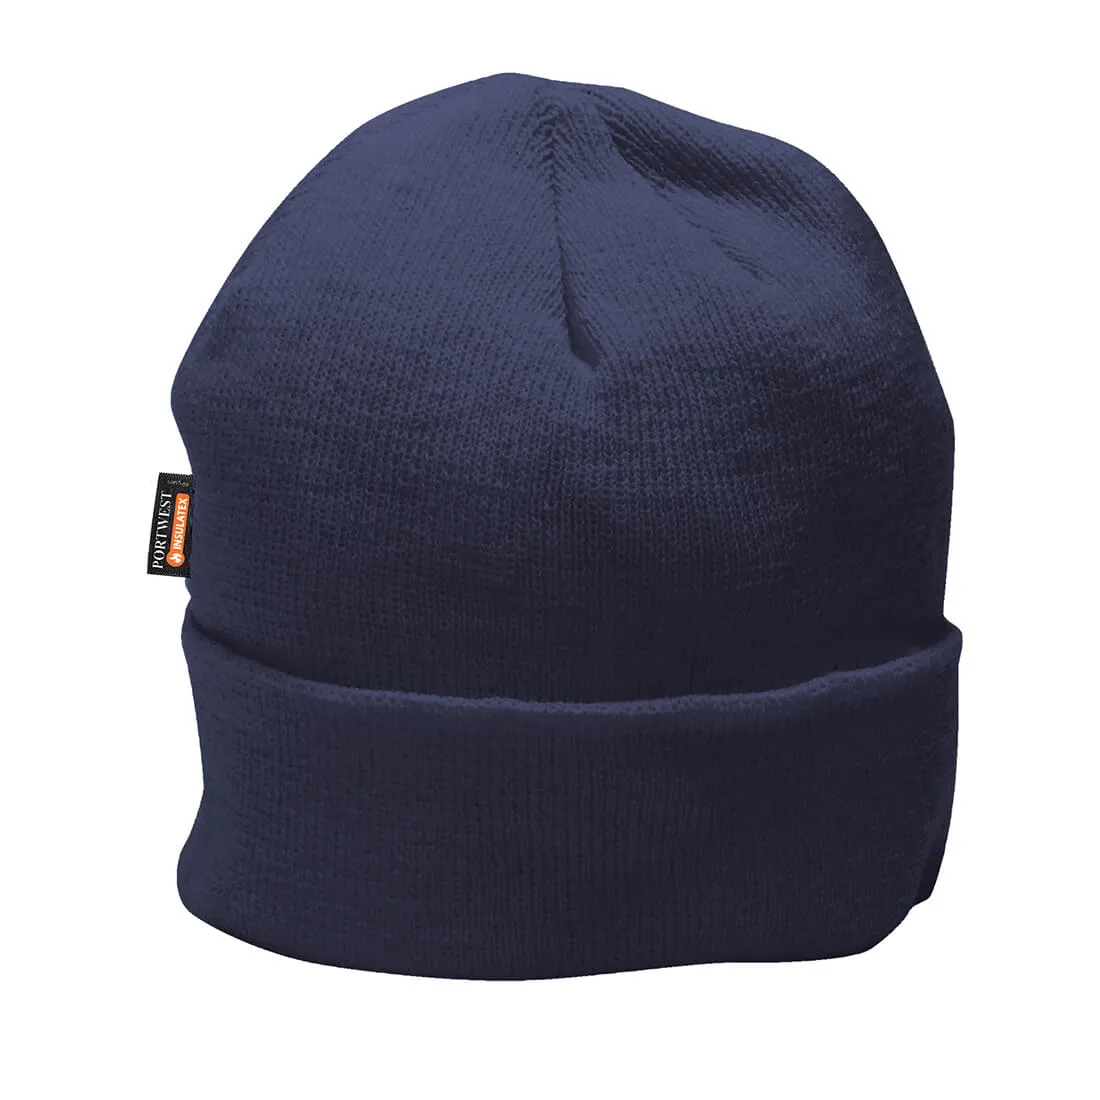 Portwest Insulatex Lined Knit Hat - Navy, One Size